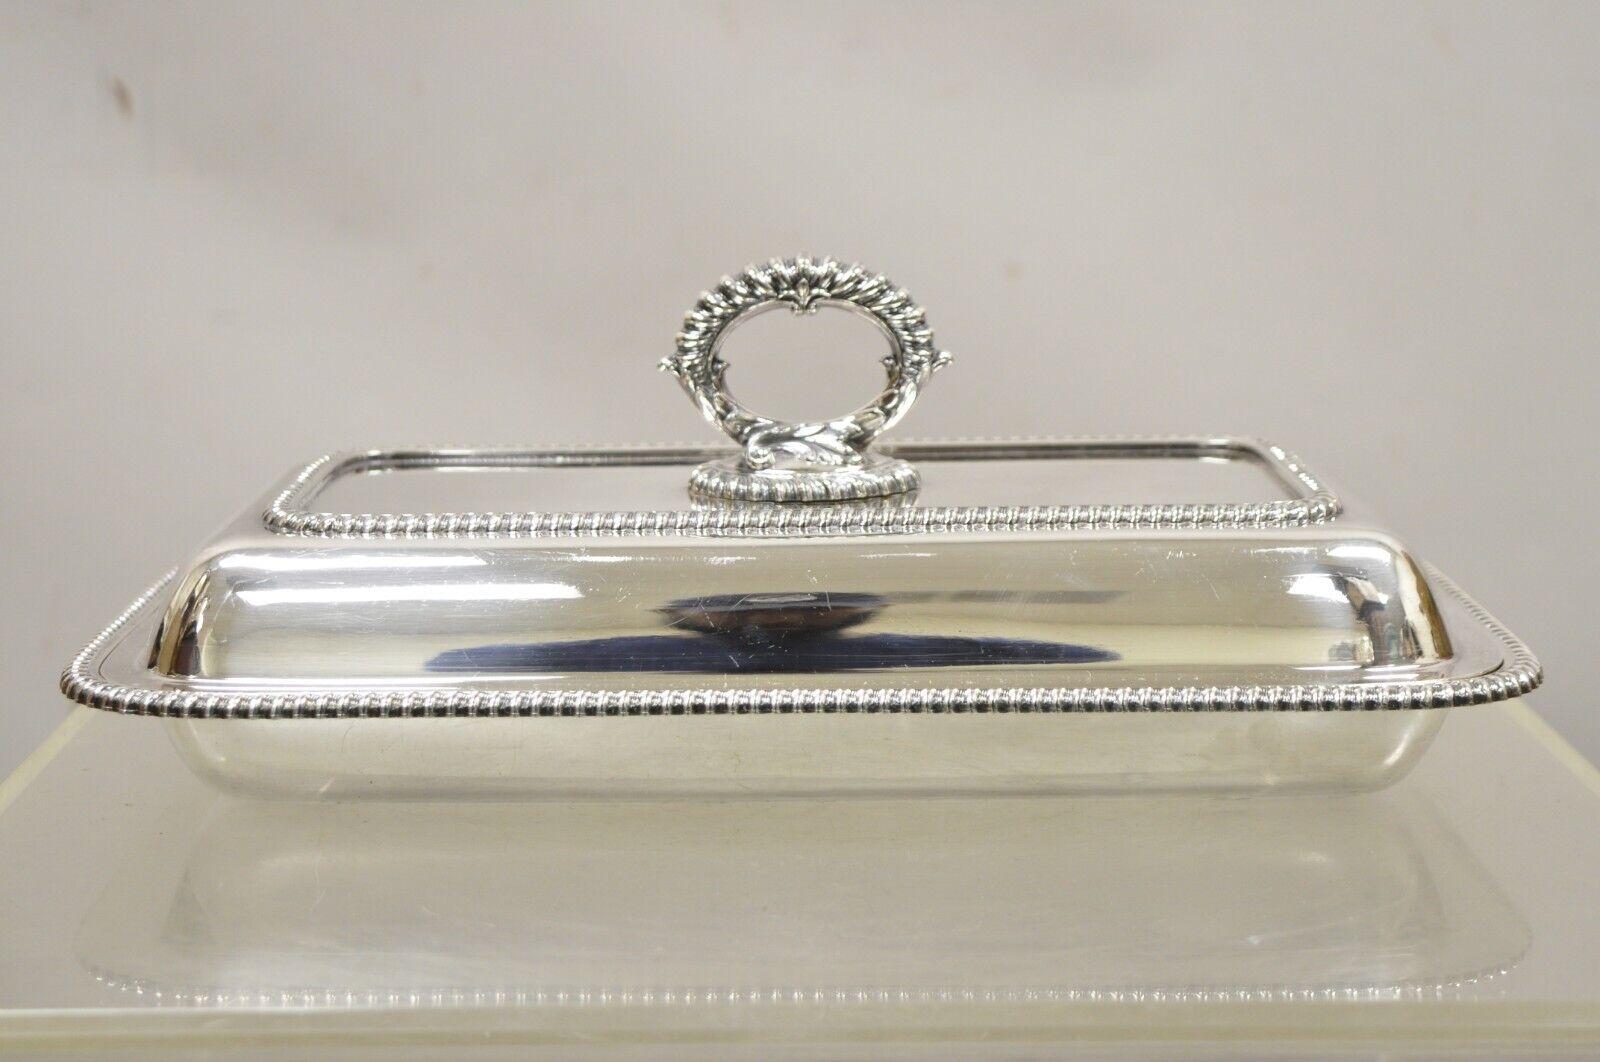 Antique English Victorian Silver Plated Lidded Serving Platter Tray Vegetable Dish. Item features 3 interior sections, ornate handle, original hallmark, very nice antique item, great style and form. Circa Early 20th Century. Measurements: 5